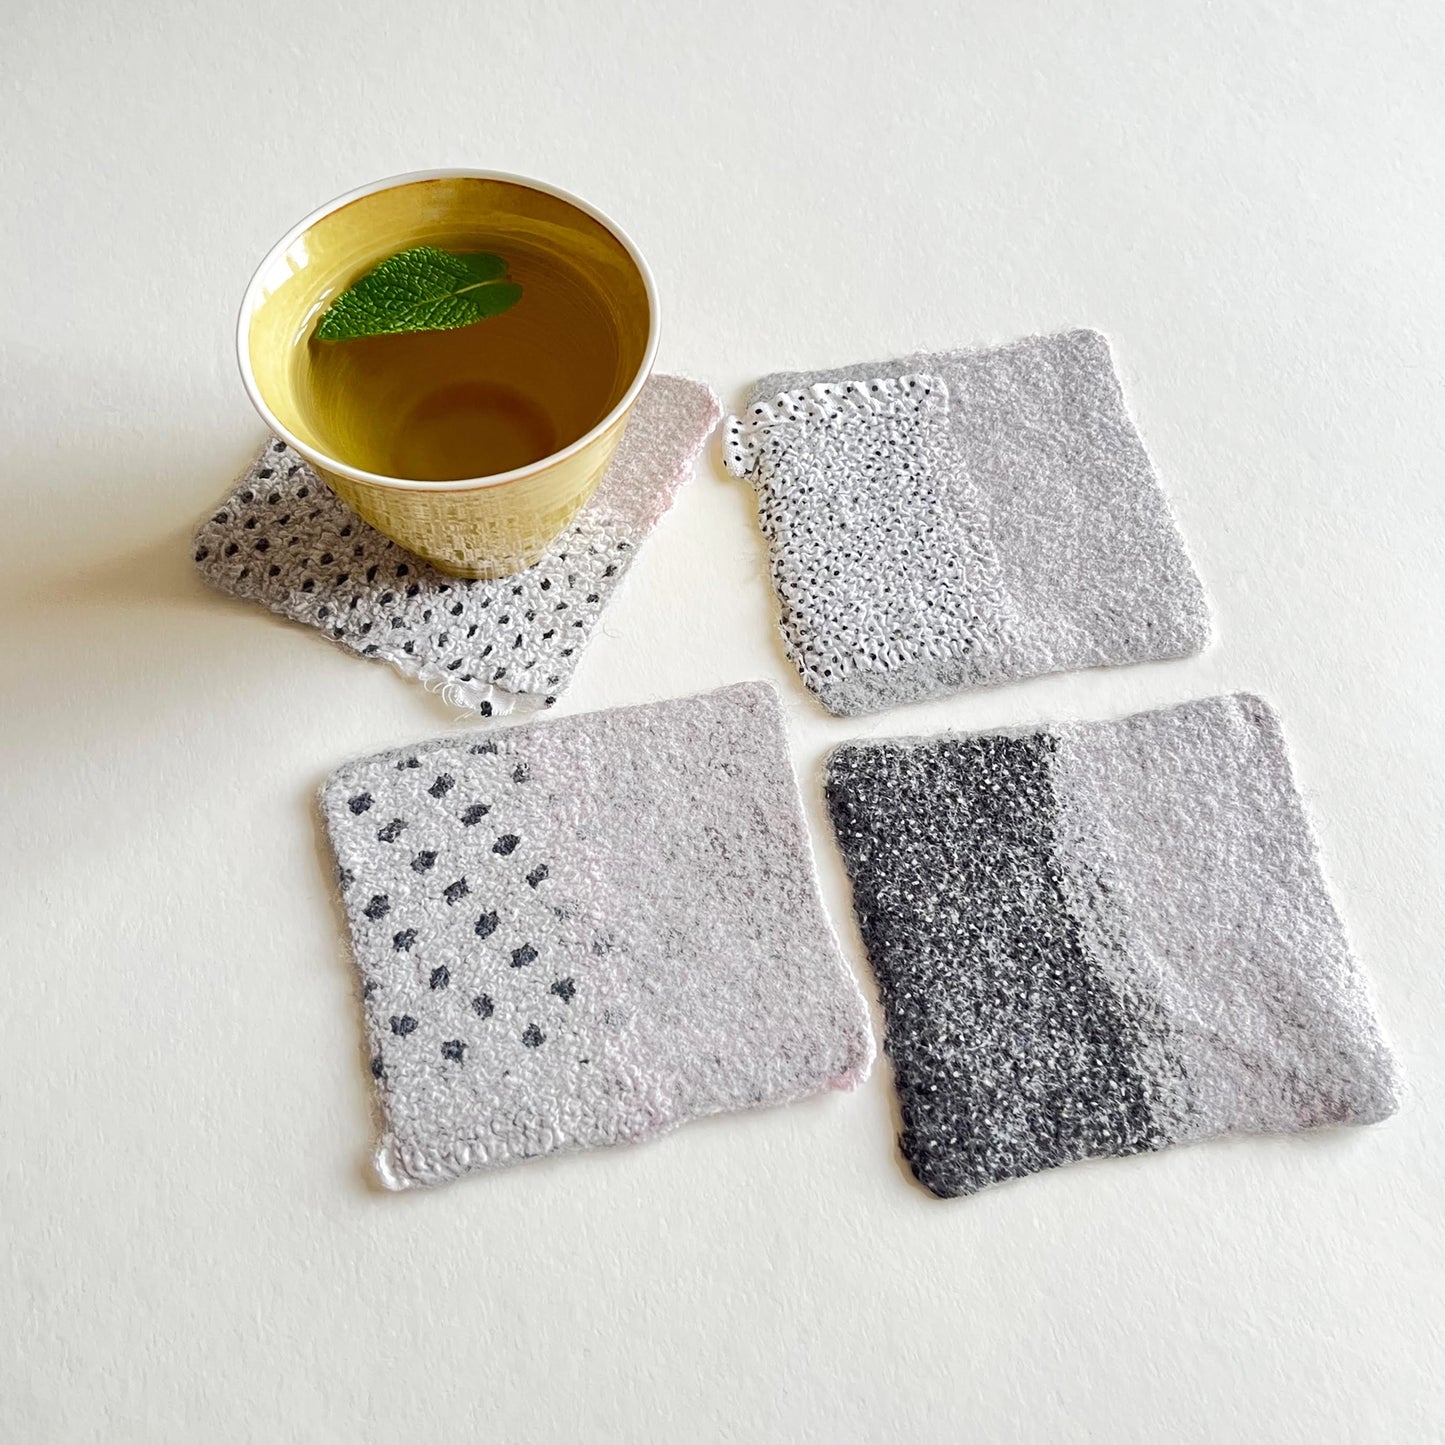 Collage - Coasters set of 4 light gray